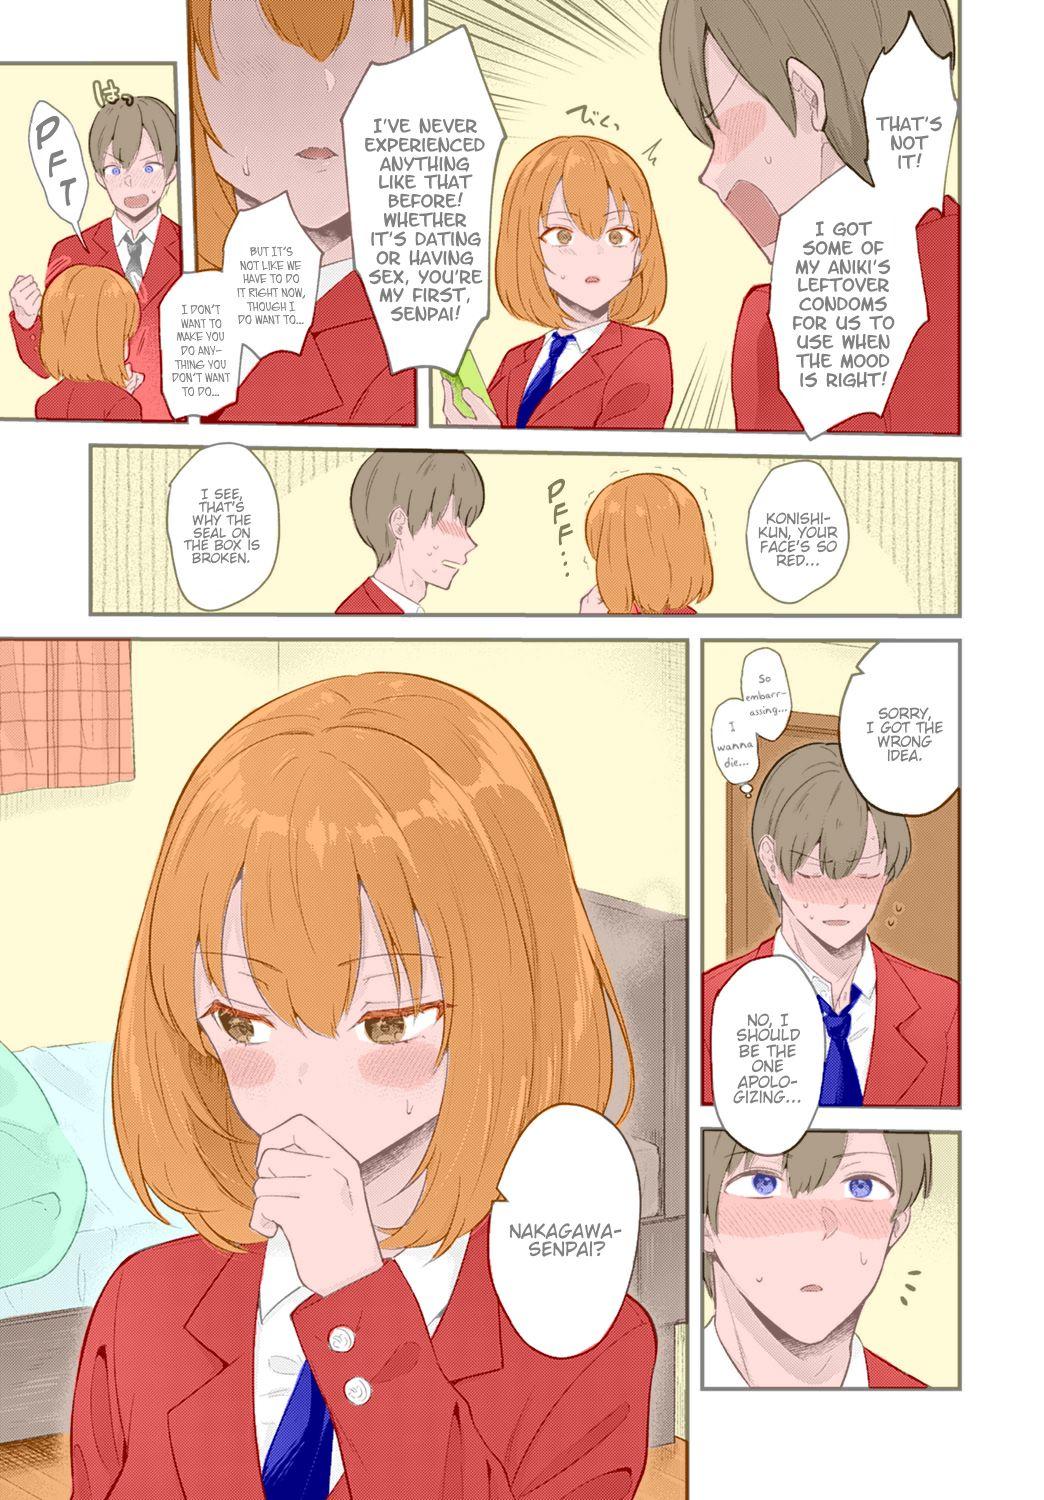 Lesbo Kanojo Face | Girlfriend Face Amatuer - Page 5